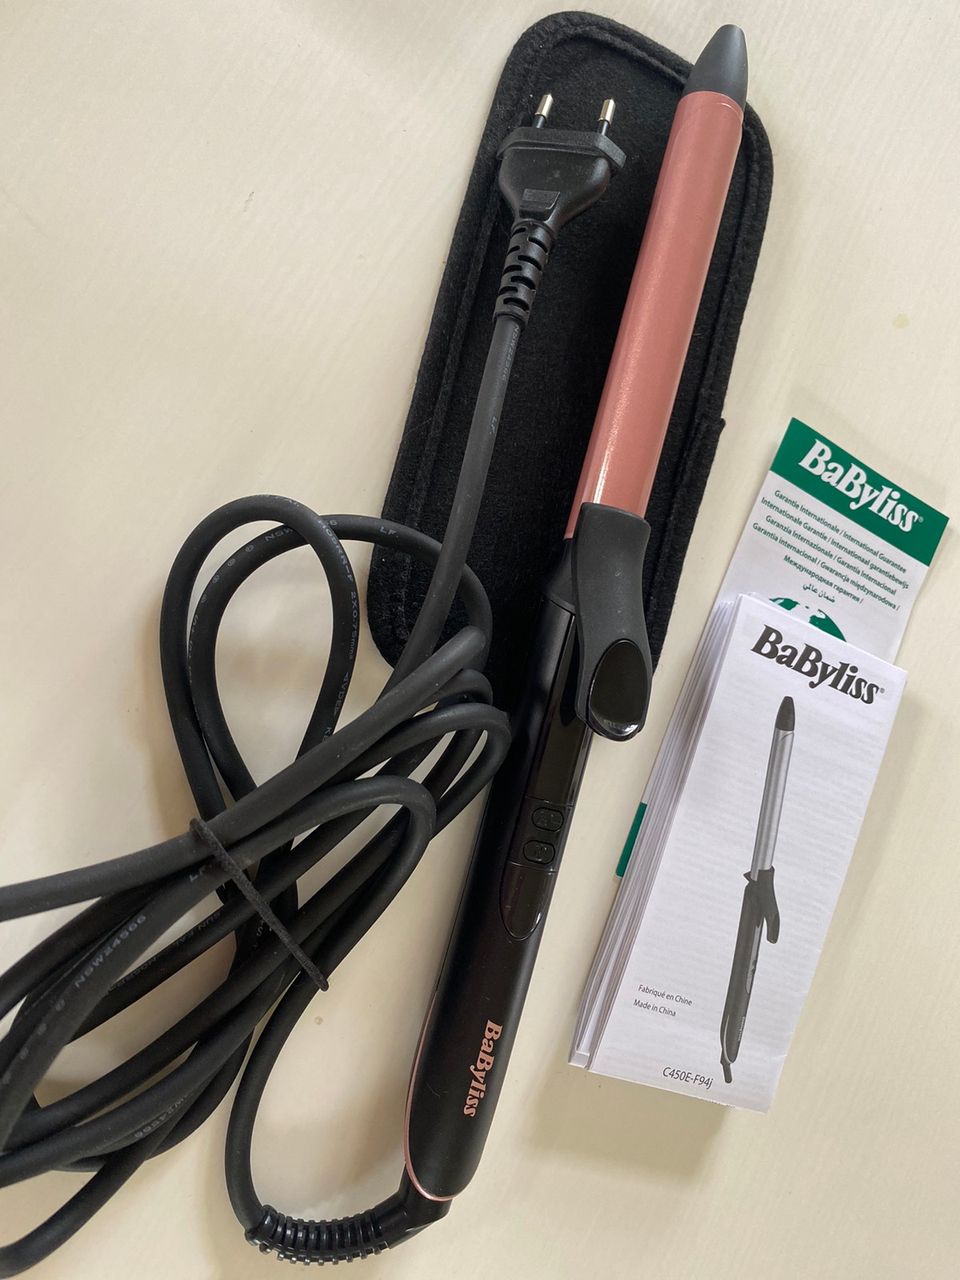 Babyliss 19 mm curling tong